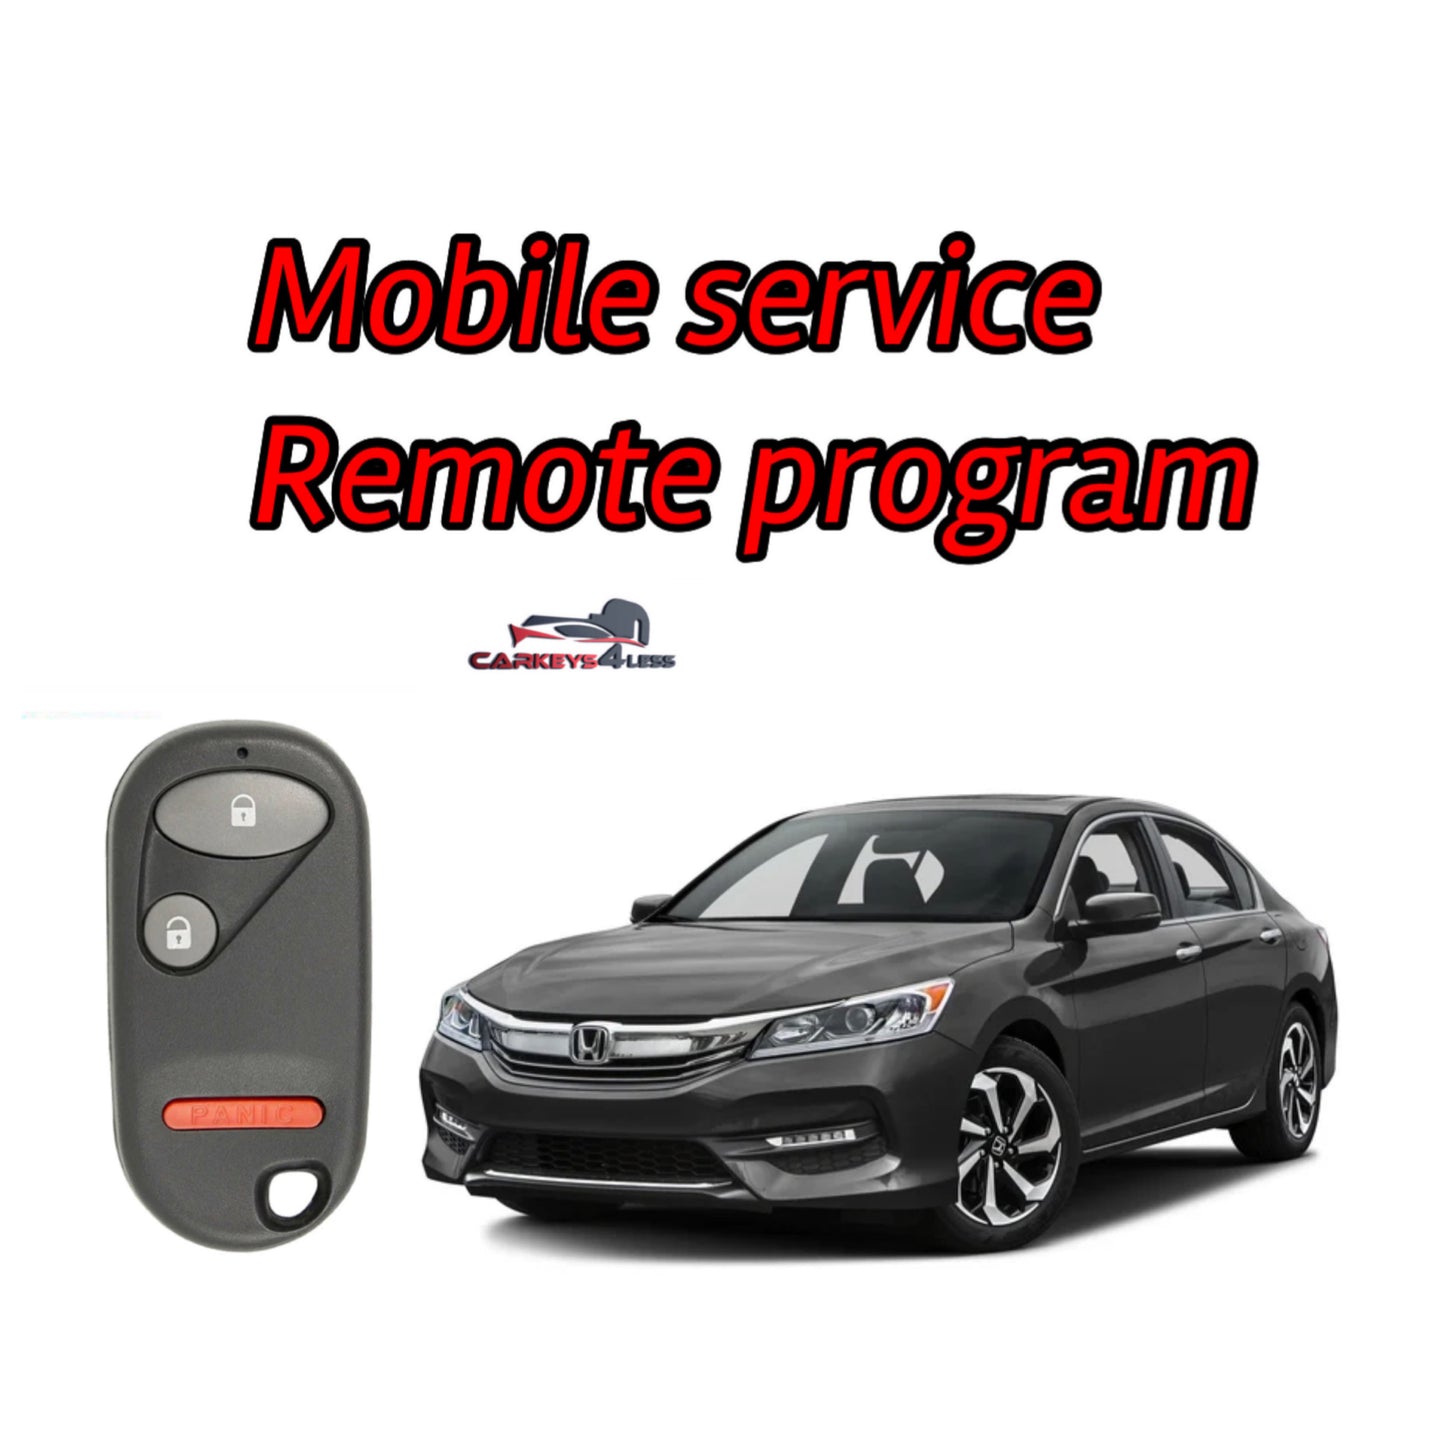 Mobile service for an aftermarket honda remote replacement